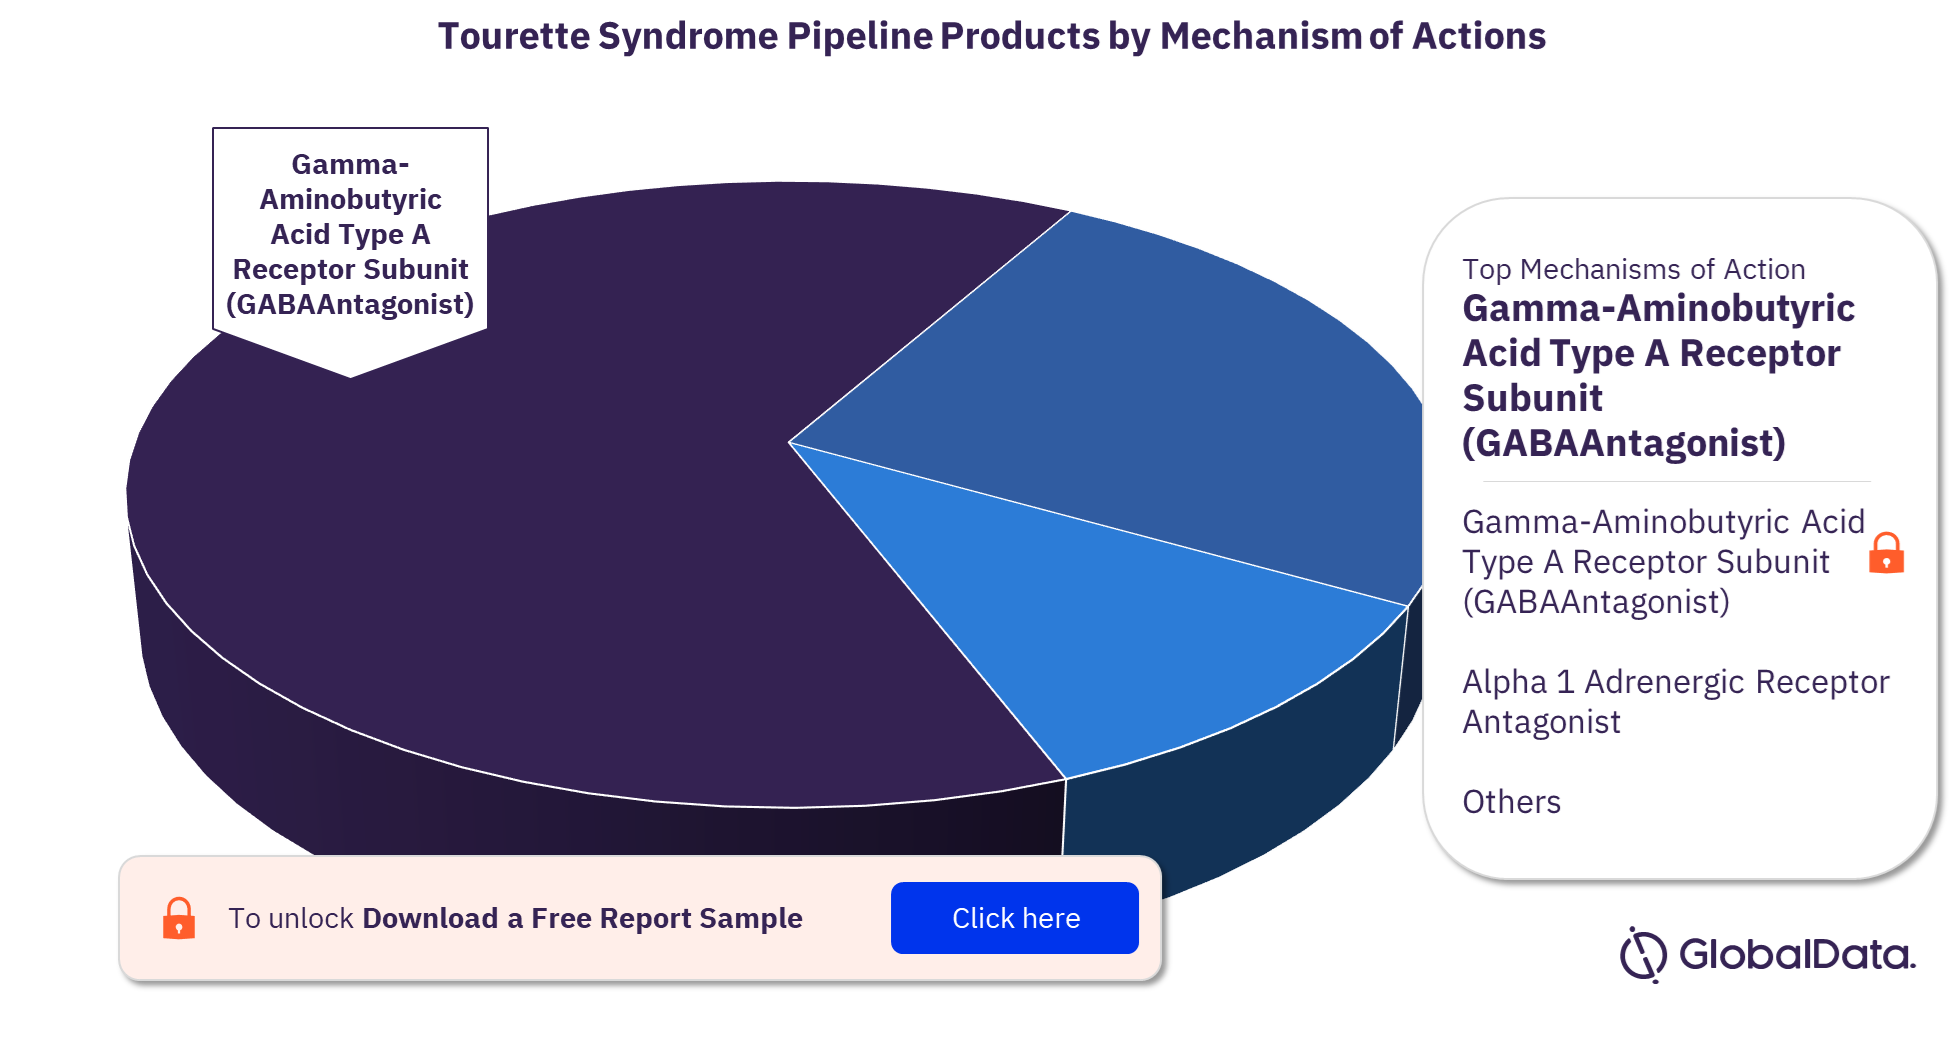 Tourette syndrome pipeline drugs market, by mechanisms of action